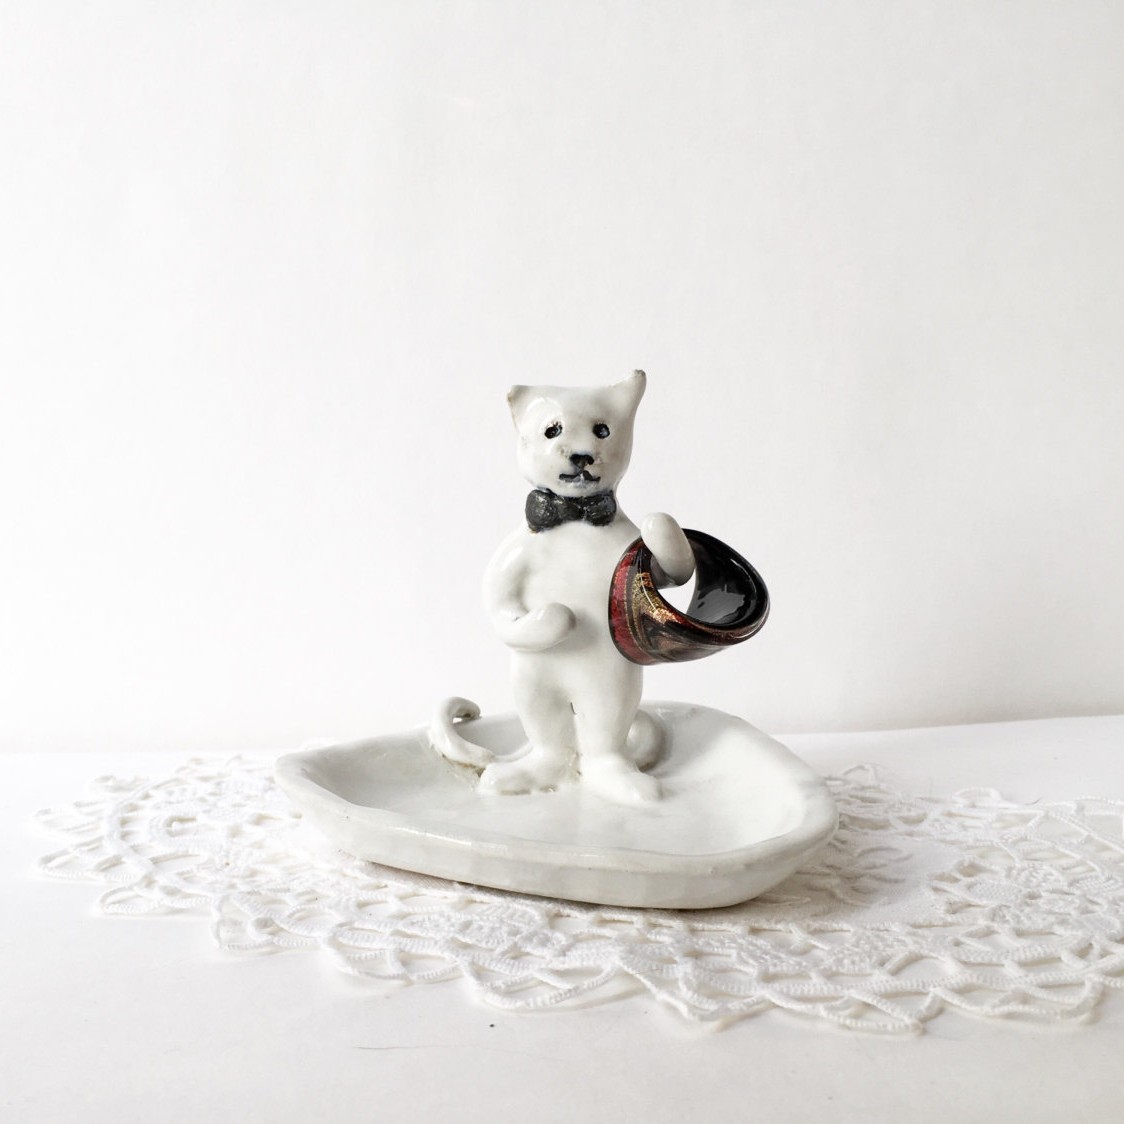 Cat Ring Dish - Ceramic Ring Holder - Cat Lover Gift - Crazy Cat Woman - Kitty Jewellery Holder - interior Deco - any age gift - unisex